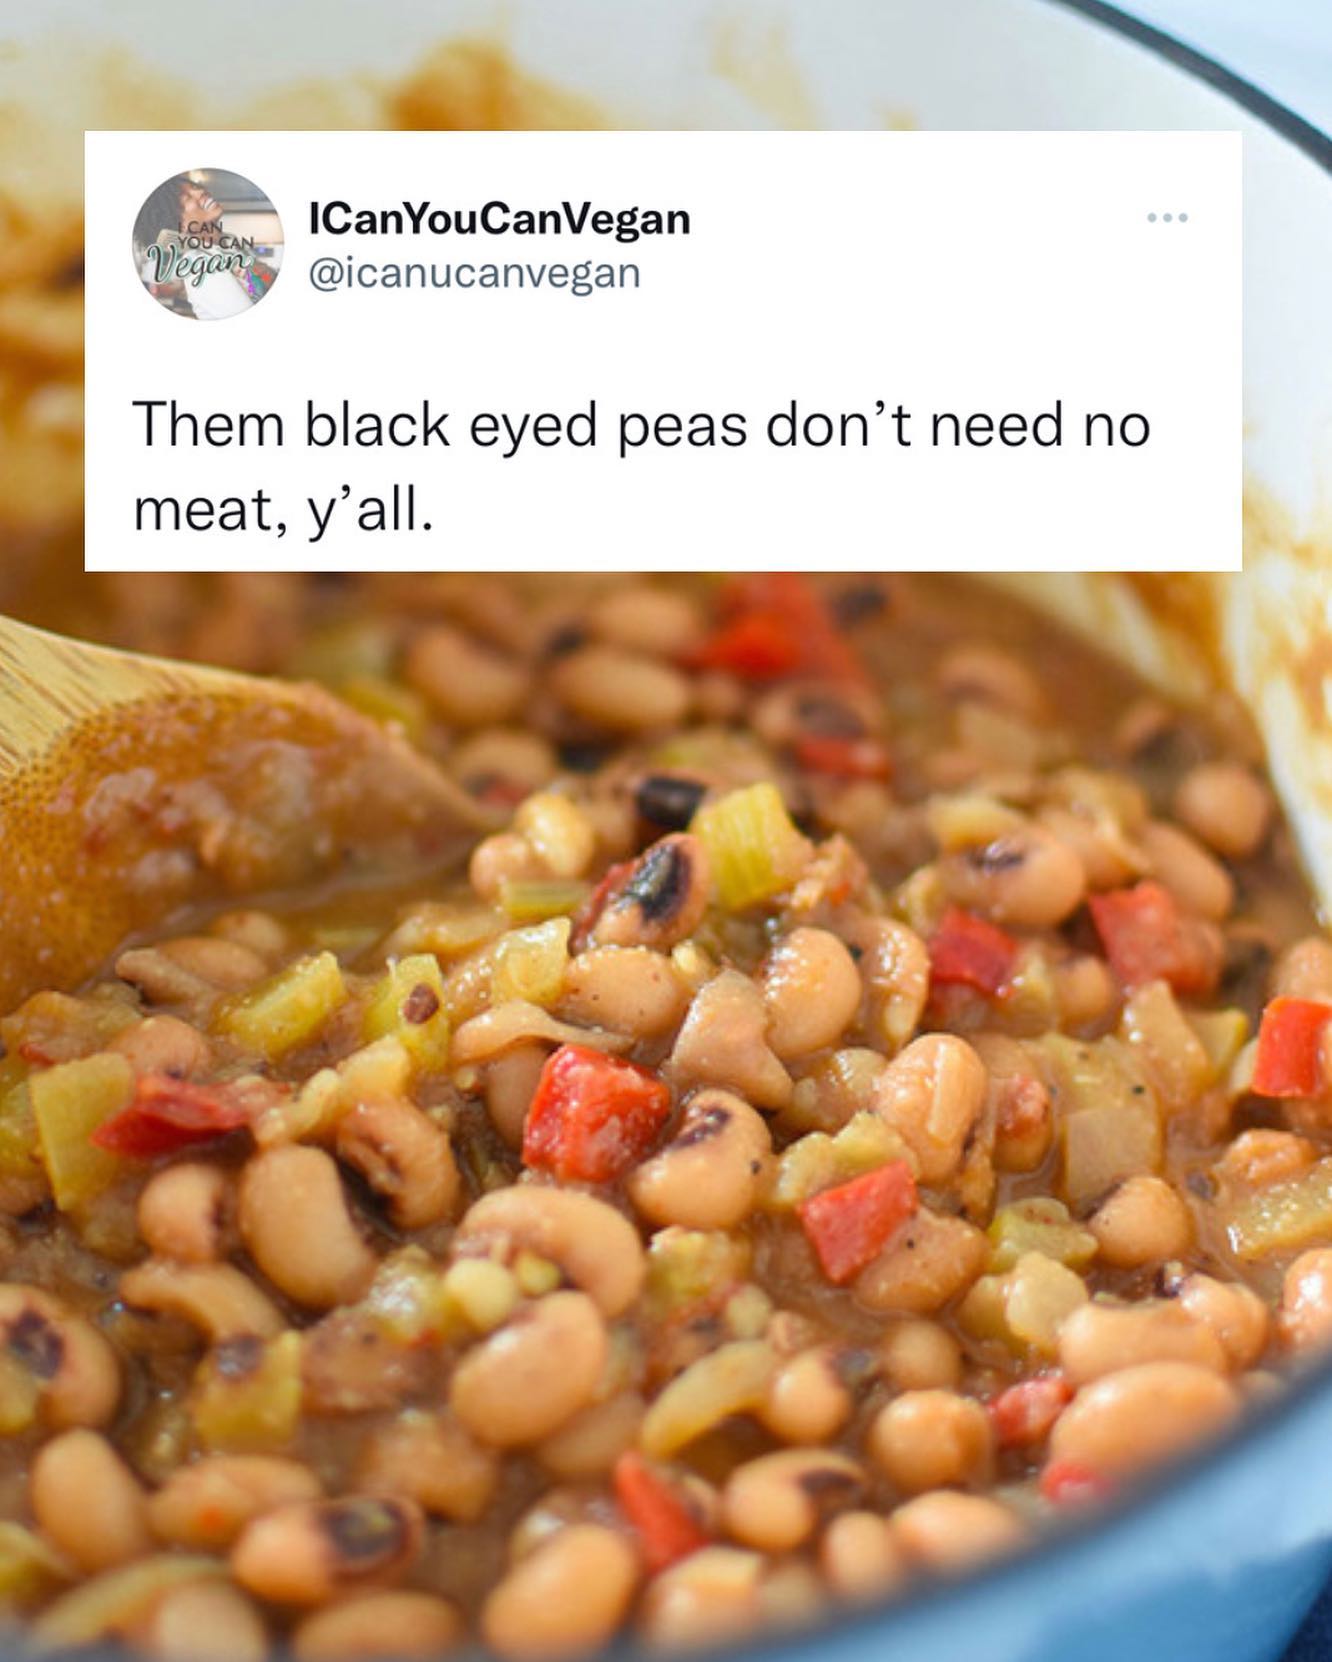 The new year is a blink away and before y’all start making your black eyed peas, consider using my meatless recipe.

All the flavor you need with a few simple seasonings and additional veggies like bell pepper and celery.

Making mine tomorrow!😆 Also #PickyAssHusbandApproved

Deets on the blog. Link in bio!
www.icanyoucanvegan.com/southern-black-eyed-peas/